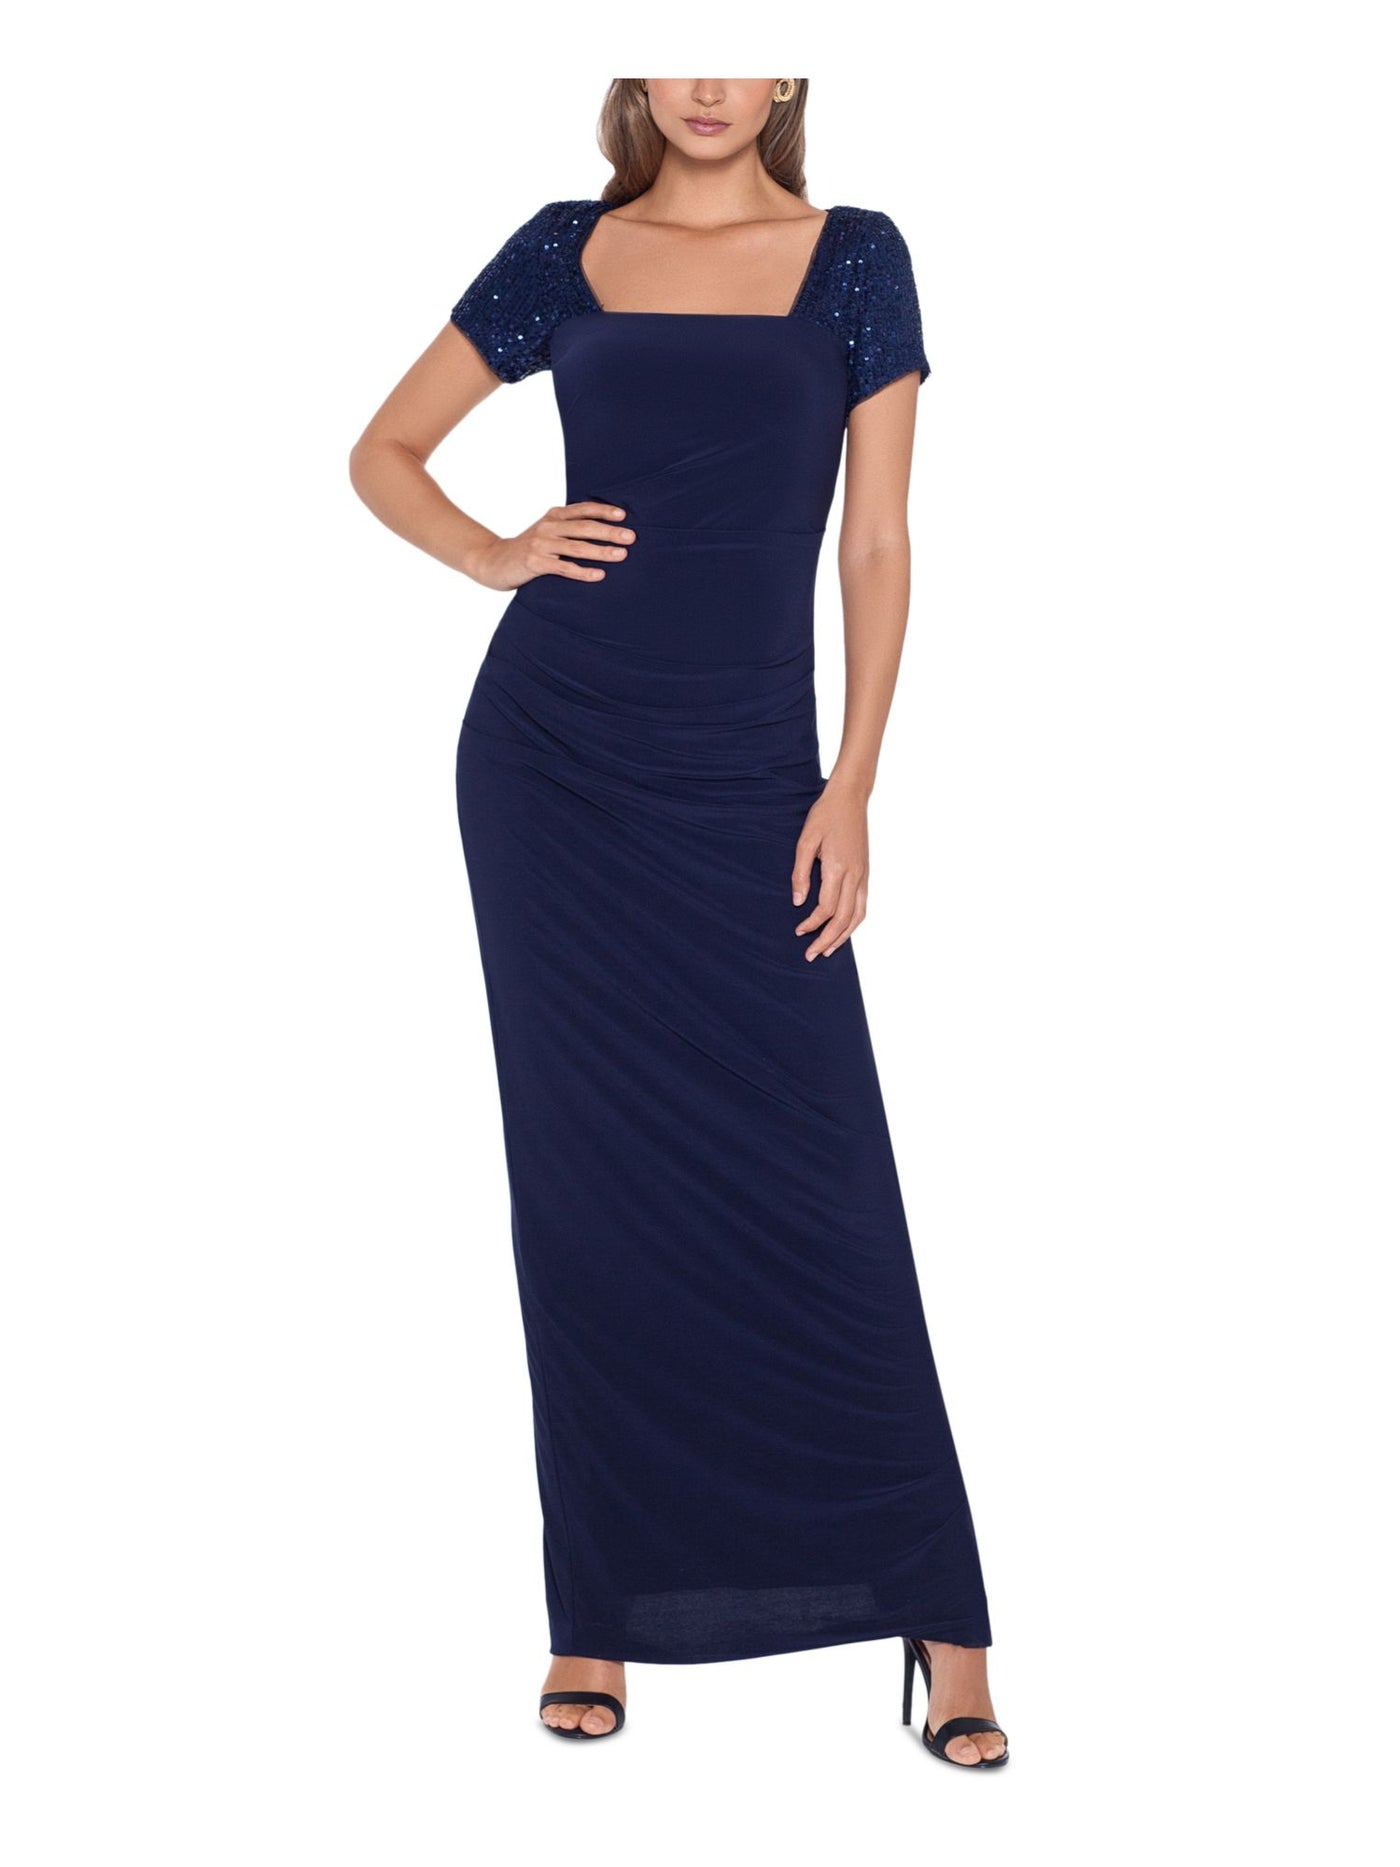 BETSY & ADAM Womens Navy Stretch Sequined Zippered Pleated Ruched Cut Out Short Sleeve Square Neck Full-Length Formal Gown Dress 8